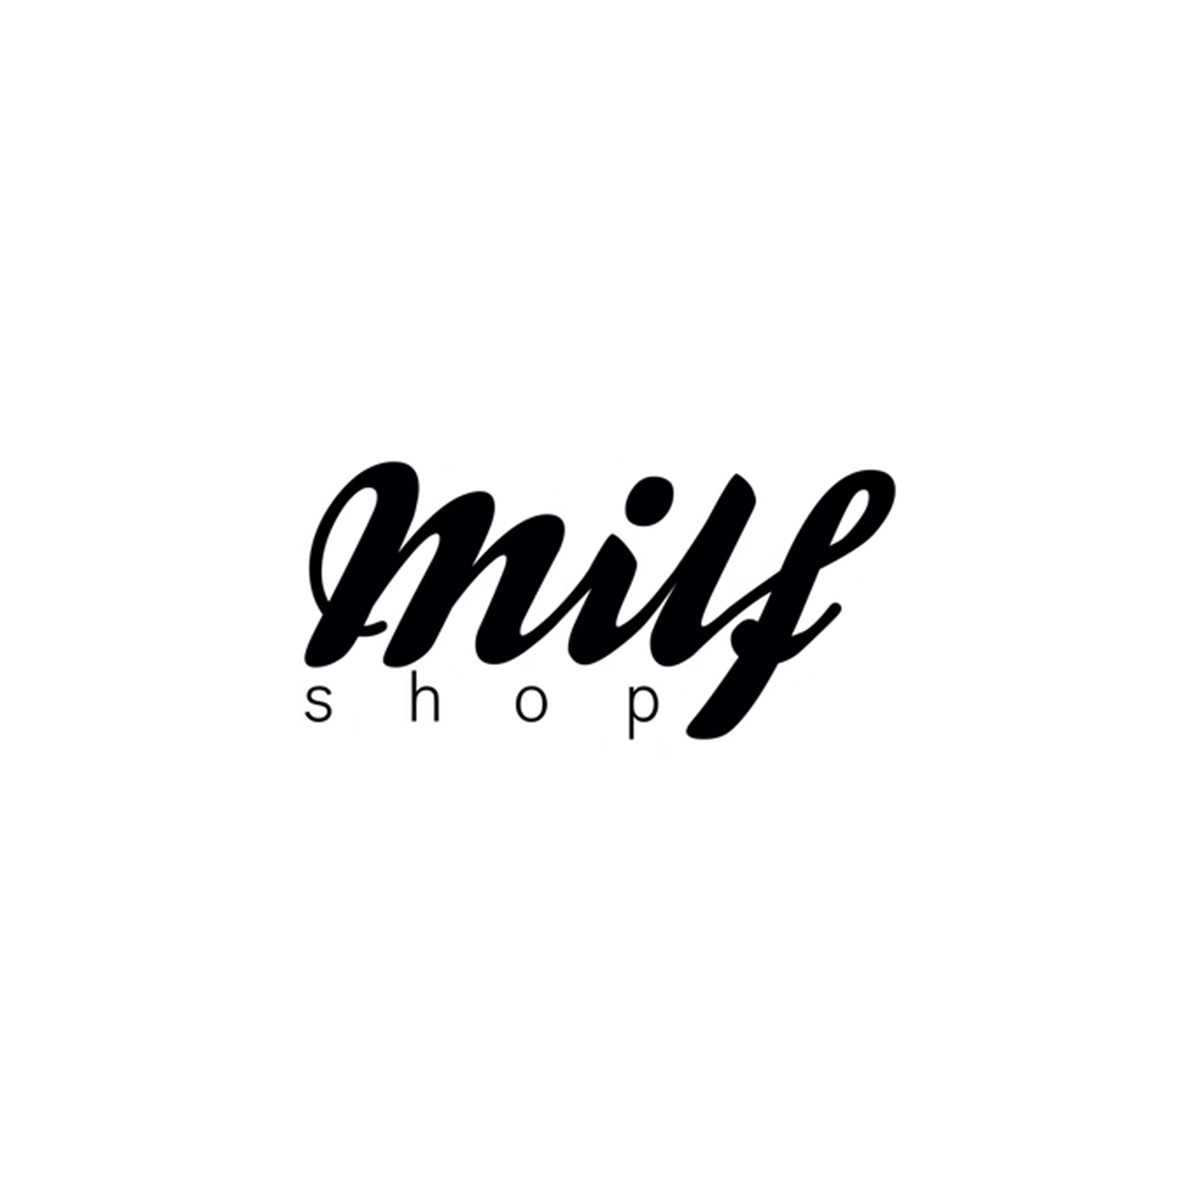 milf-shop - I AM THE ONLY ONE TO CALL ME A MILF.